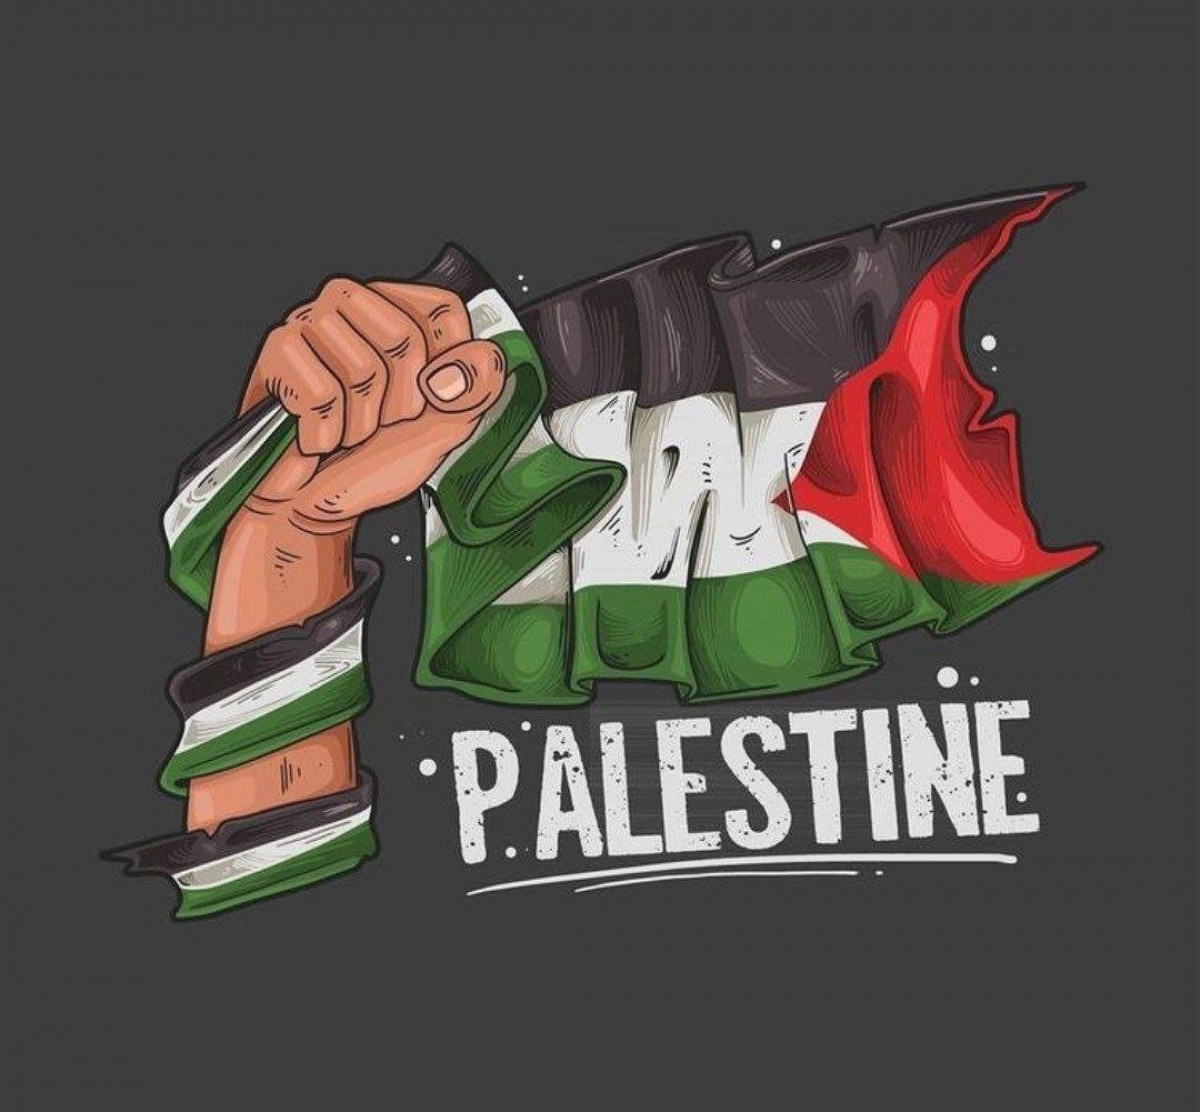 I stand in solidarity with Palestinians as they are continually forced to fight for their right to live with human dignity